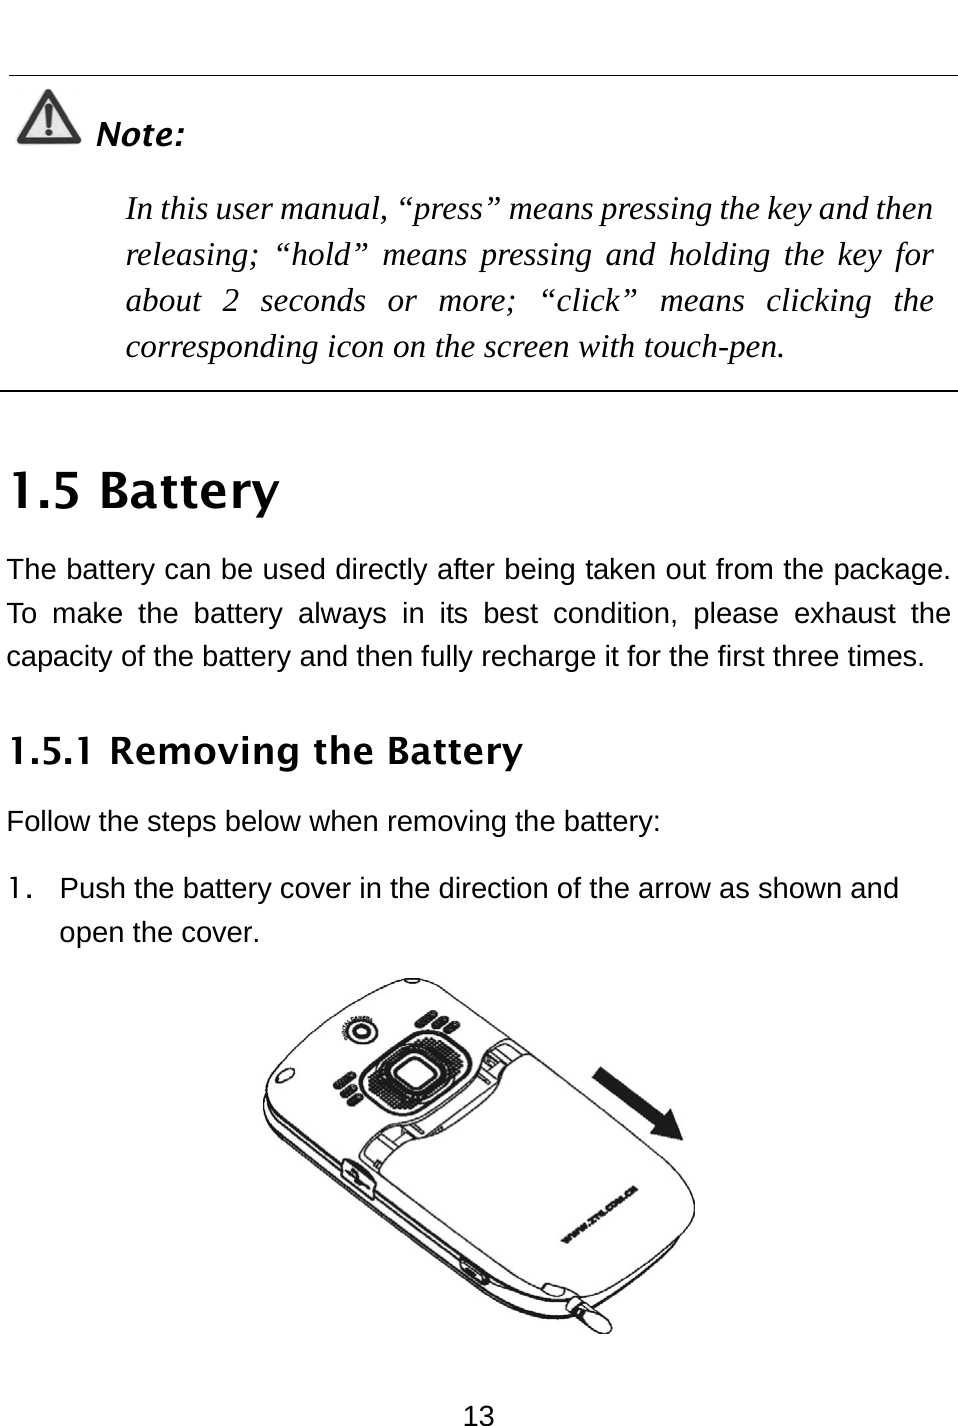  13  Note: In this user manual, “press” means pressing the key and then releasing; “hold” means pressing and holding the key for about 2 seconds or more; “click” means clicking the corresponding icon on the screen with touch-pen.  1.5 Battery The battery can be used directly after being taken out from the package. To make the battery always in its best condition, please exhaust the capacity of the battery and then fully recharge it for the first three times. 1.5.1 Removing the Battery Follow the steps below when removing the battery:   1.  Push the battery cover in the direction of the arrow as shown and open the cover.  